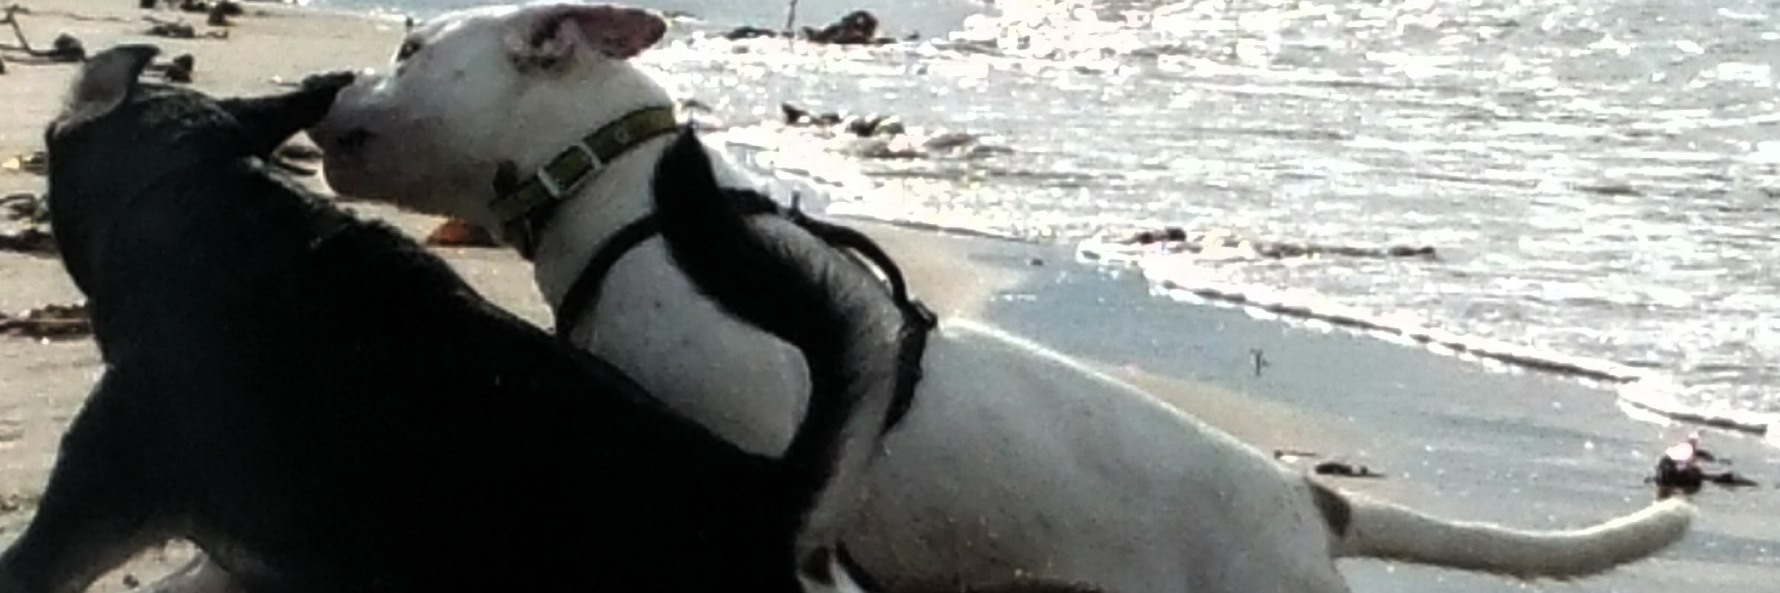 black dog and white dog play fighting on beach